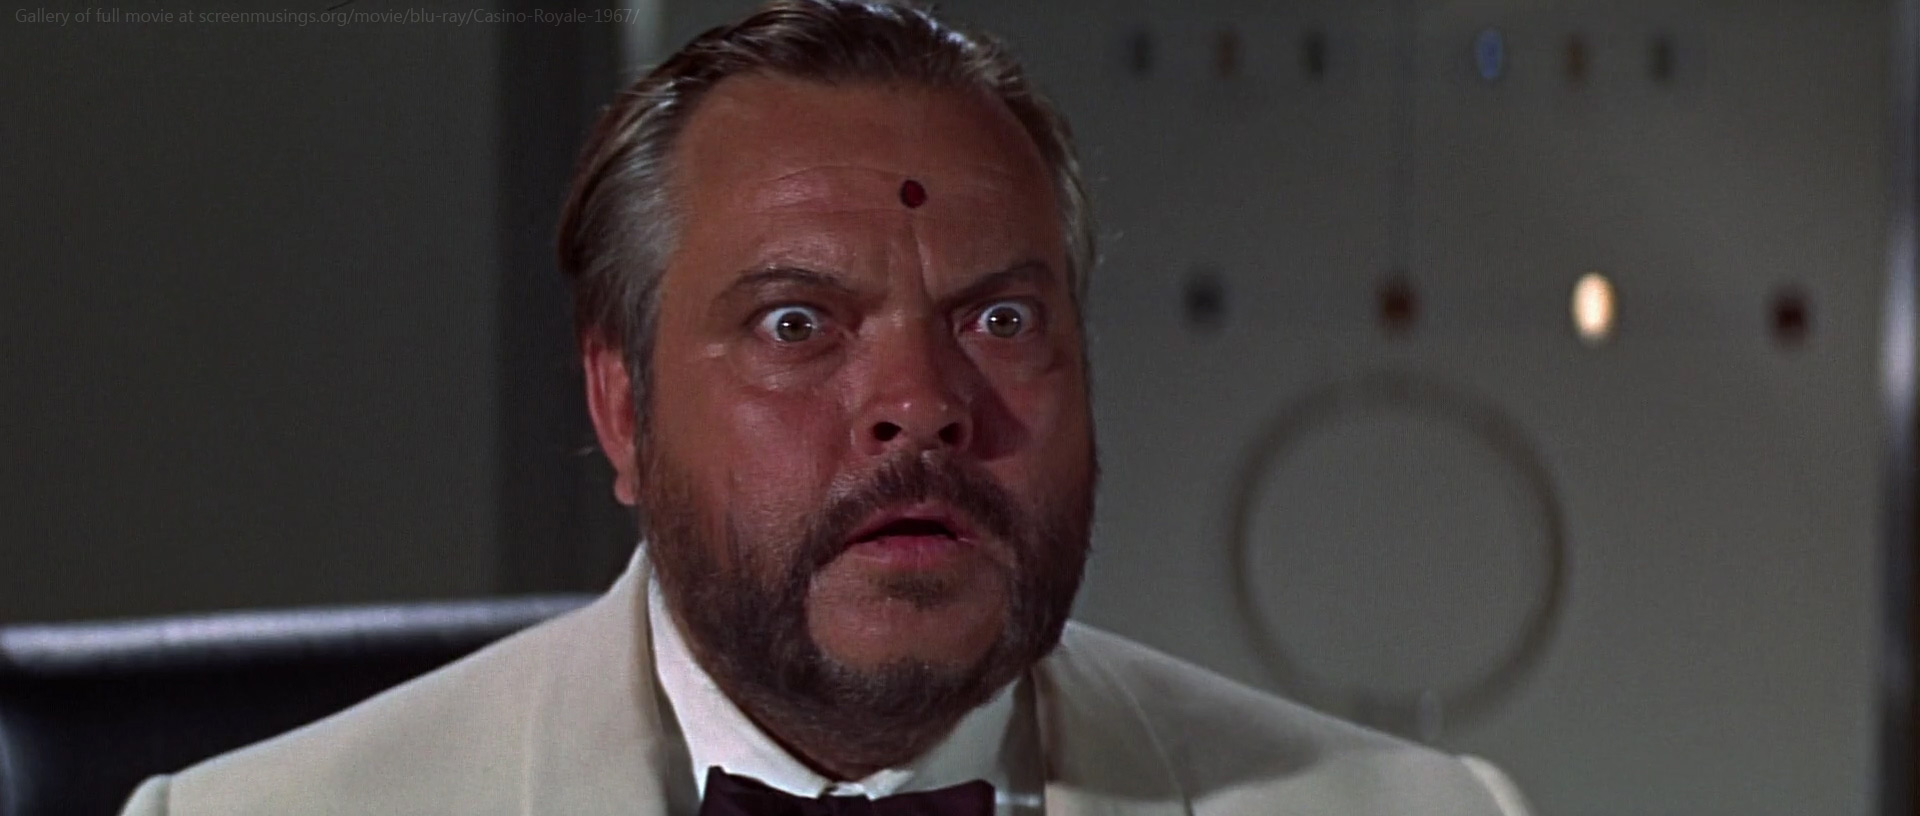 Orson Welles in Casino Royale